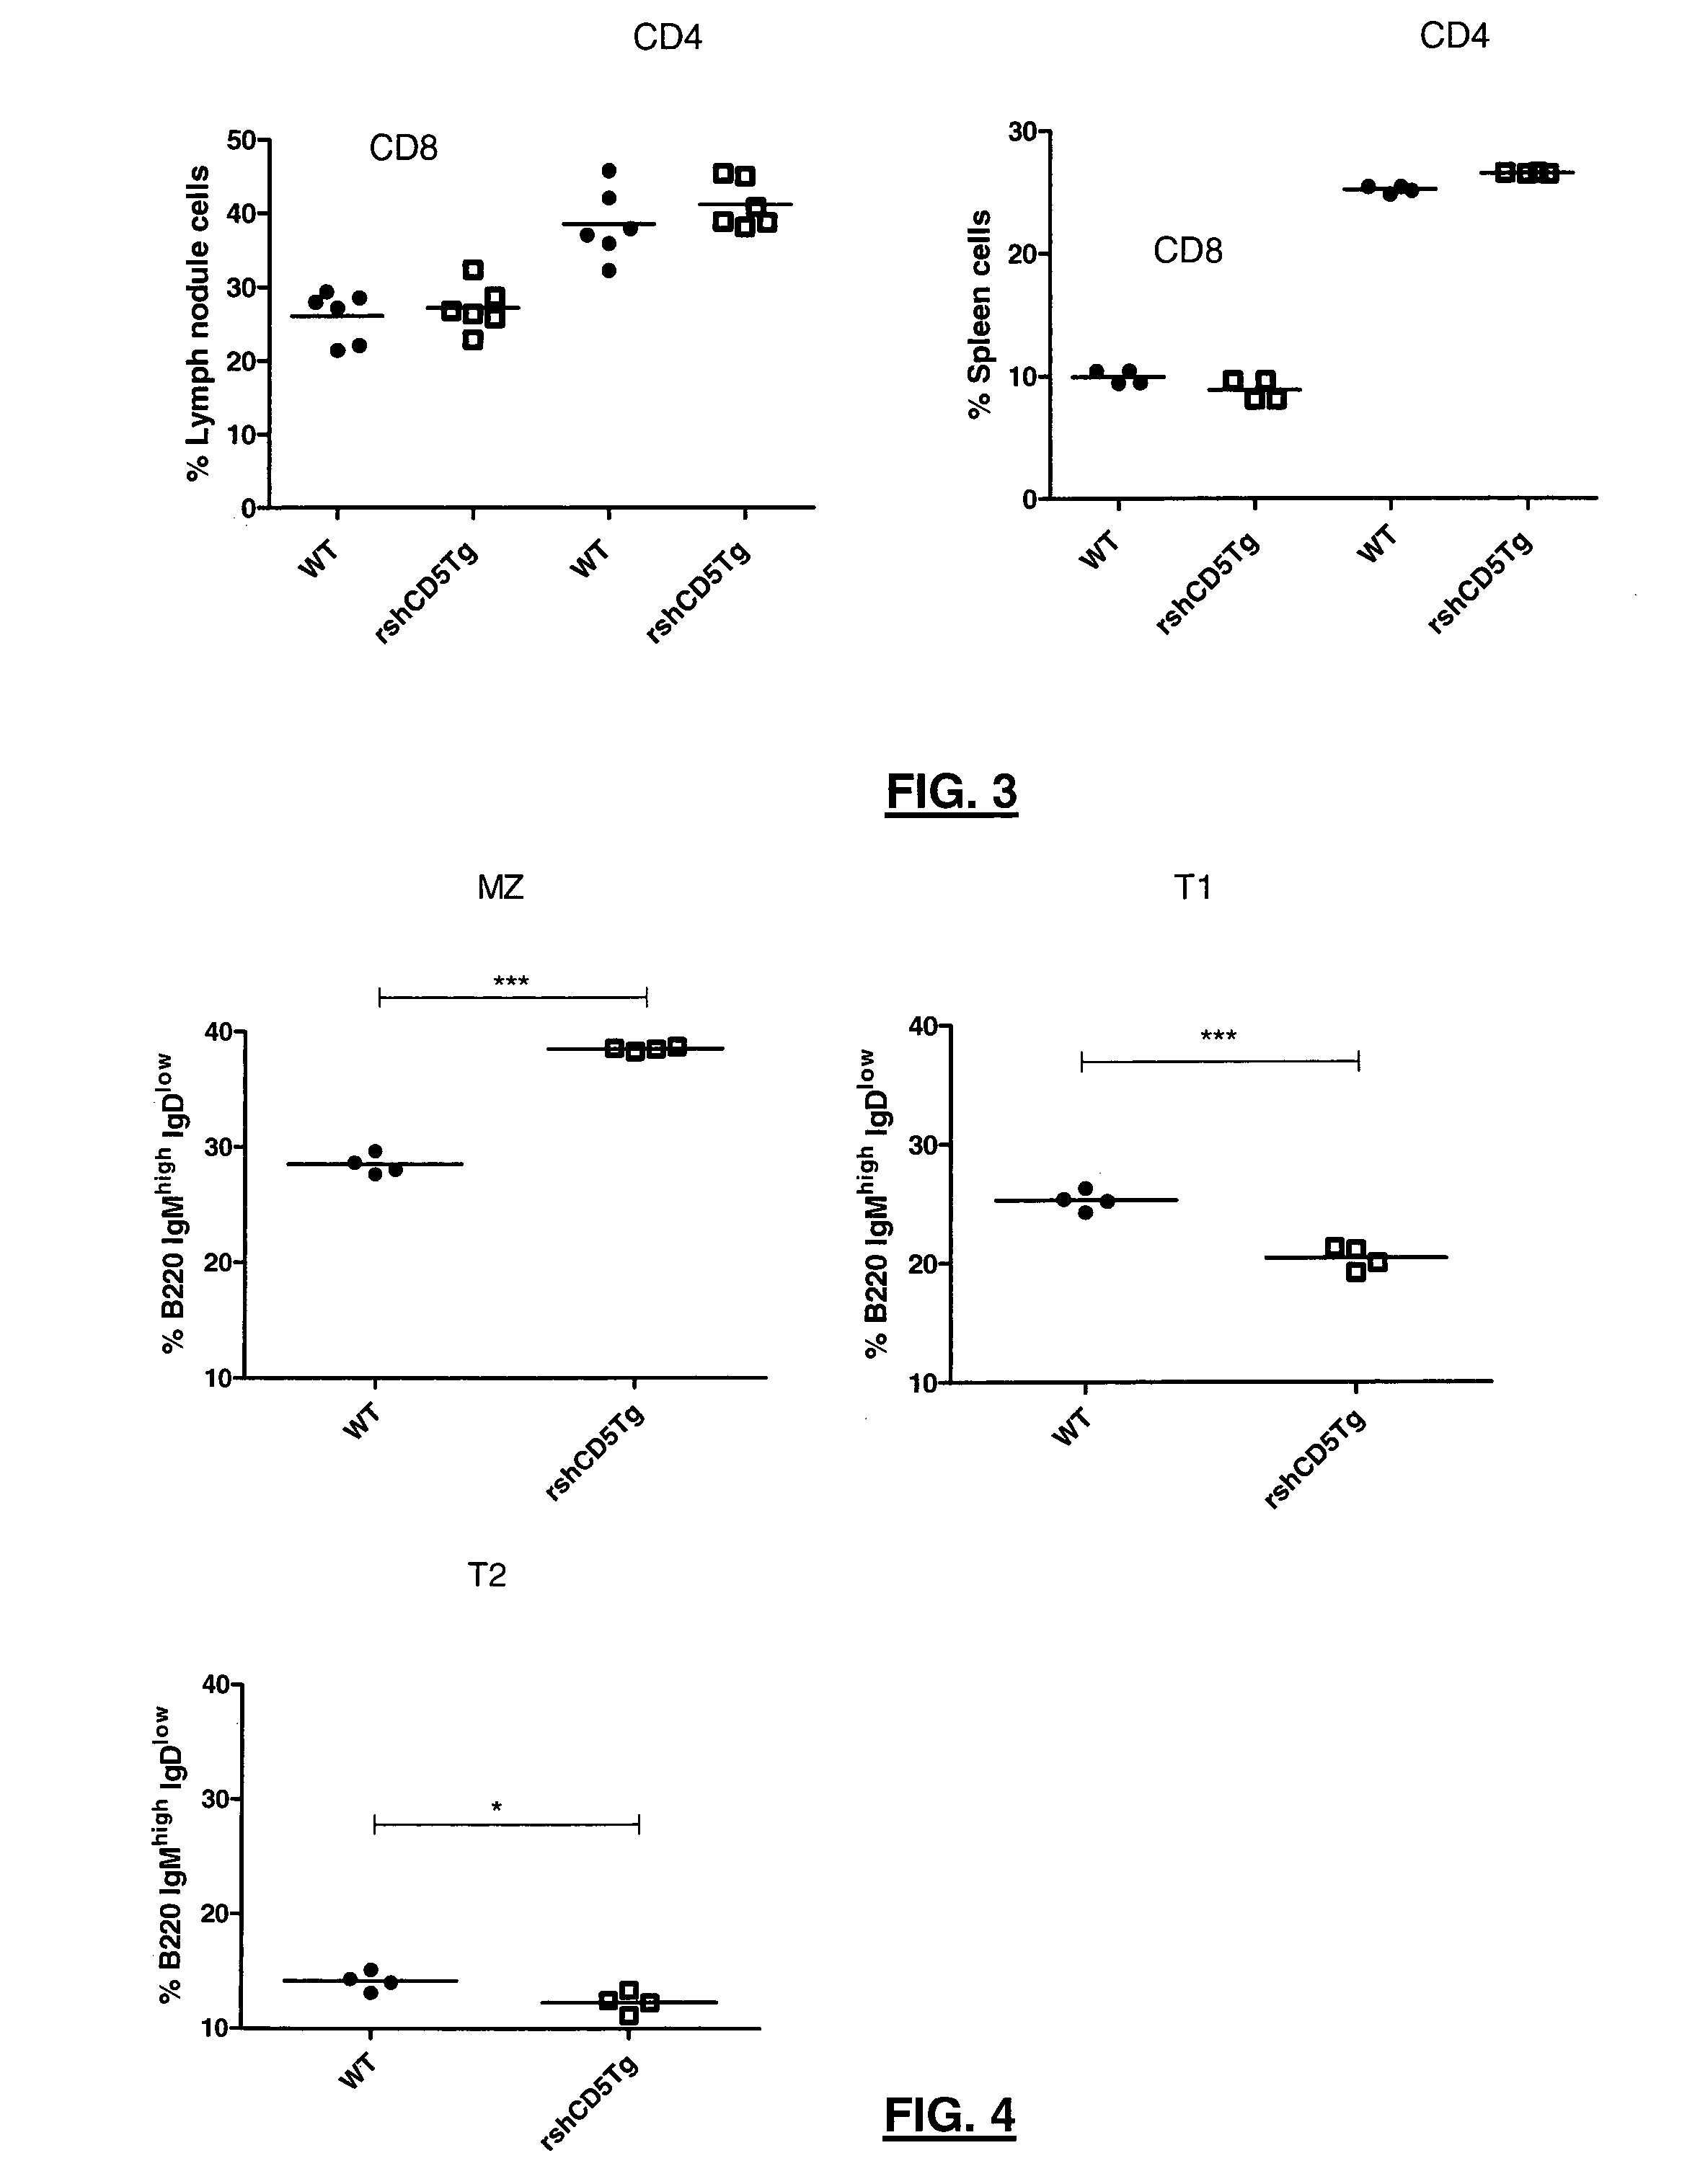 Soluble protein cd5 or cd6 for the treatment of cancer or tumor or for use as an adjuvant